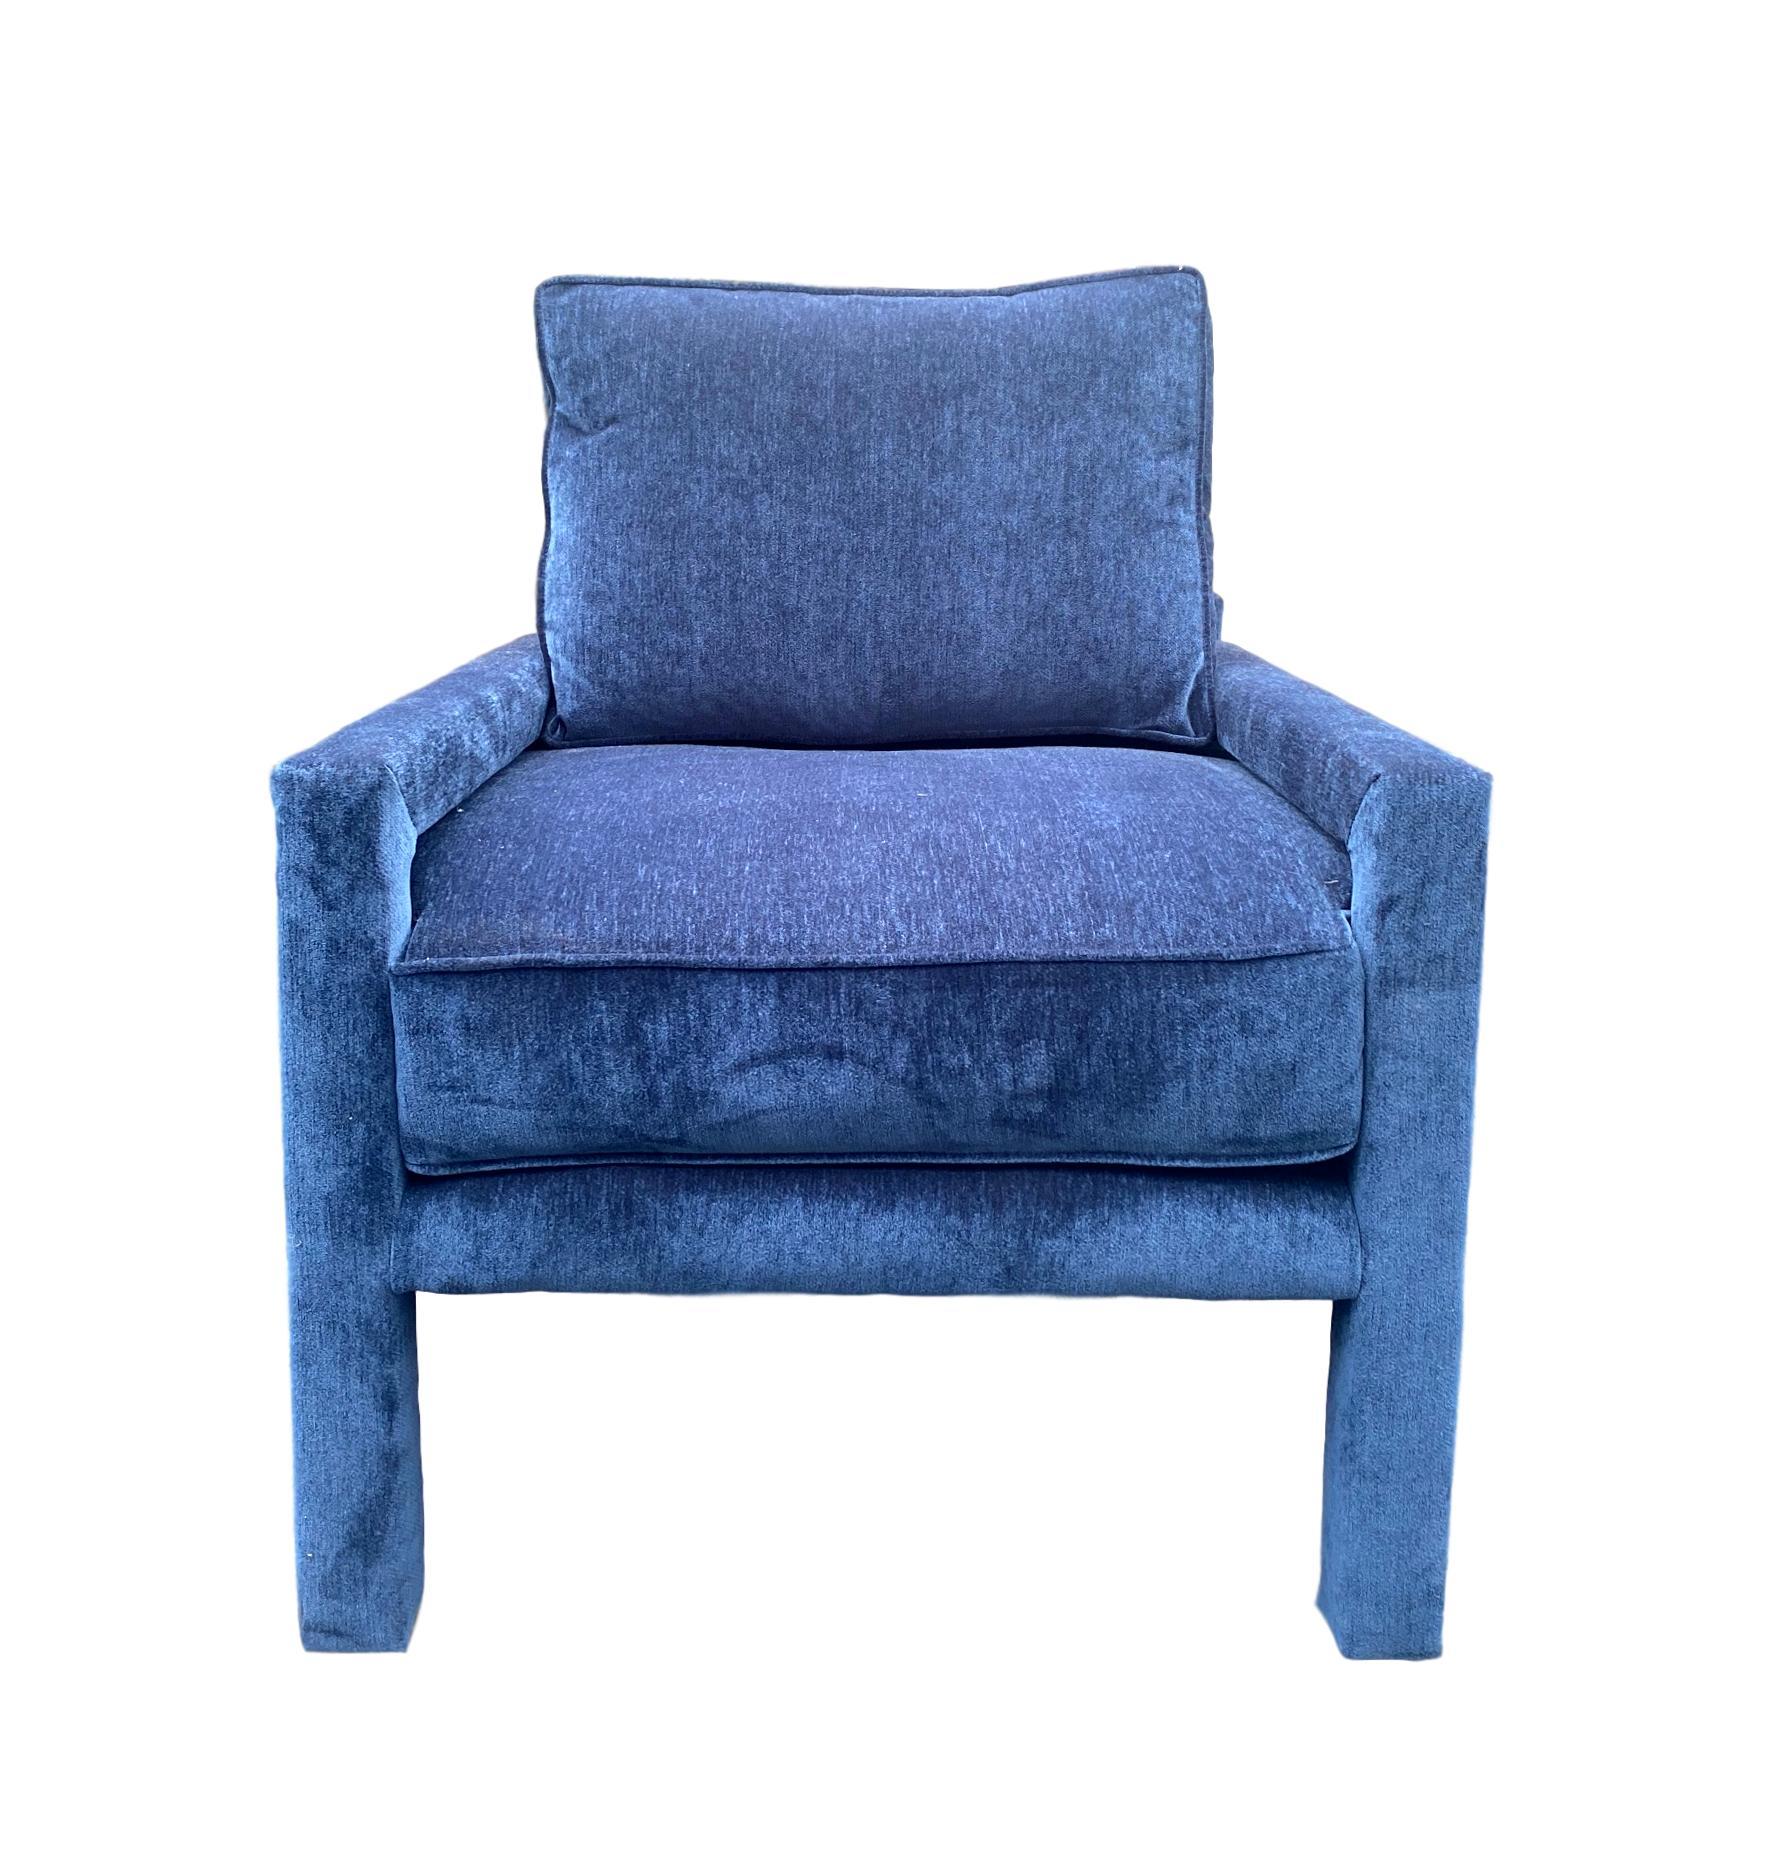 Pair of New Milo Baughman style iconic 'Parsons chairs' upholstered in ultra-luxurious velvet in Pantone Classic blue. Our chairs are handcrafted and upholstered from new materials and new fabric by the best craftsmen and artisans in Morganton, NC,